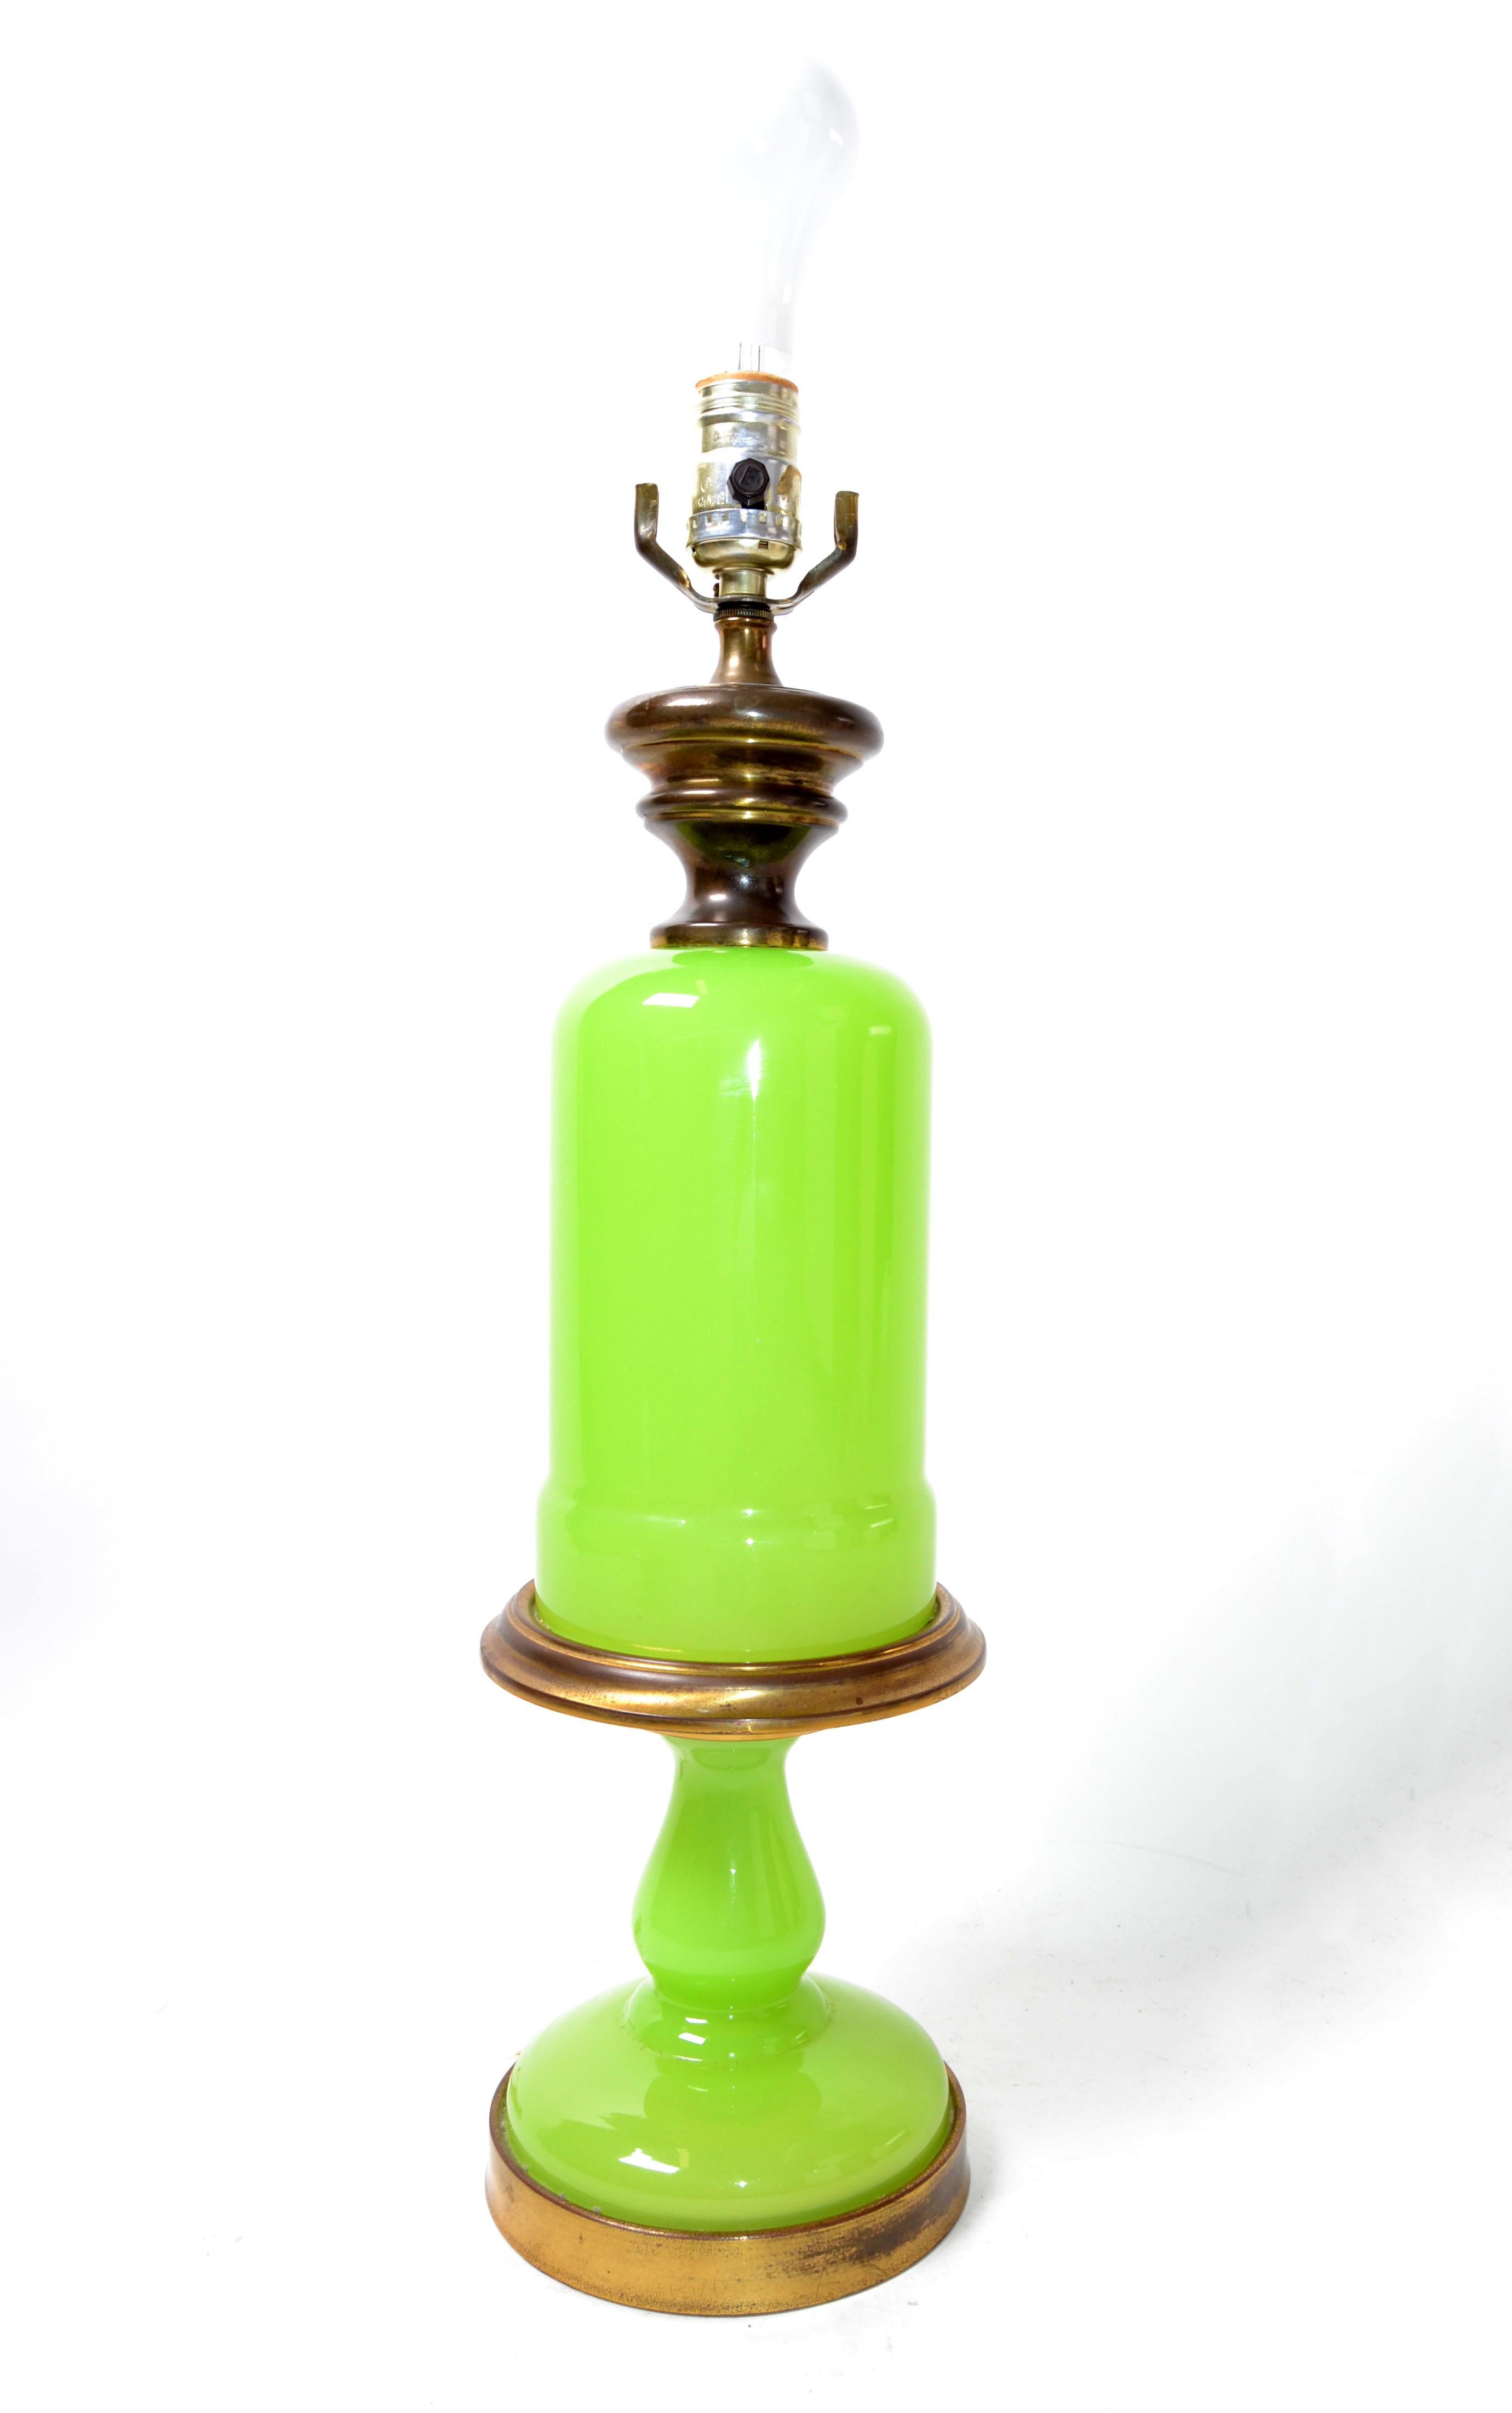 Art Deco Gino Cenedese Jade Green Murano glass table lamp with Brass detail. 
Made in Italy in the 1950s.
US Wiring and takes a regular Light bulb or LED Bulb. 
Lamp measurements:
Diameter: 6 inches, Height to the top of socket: 22 inches.
No Shade.